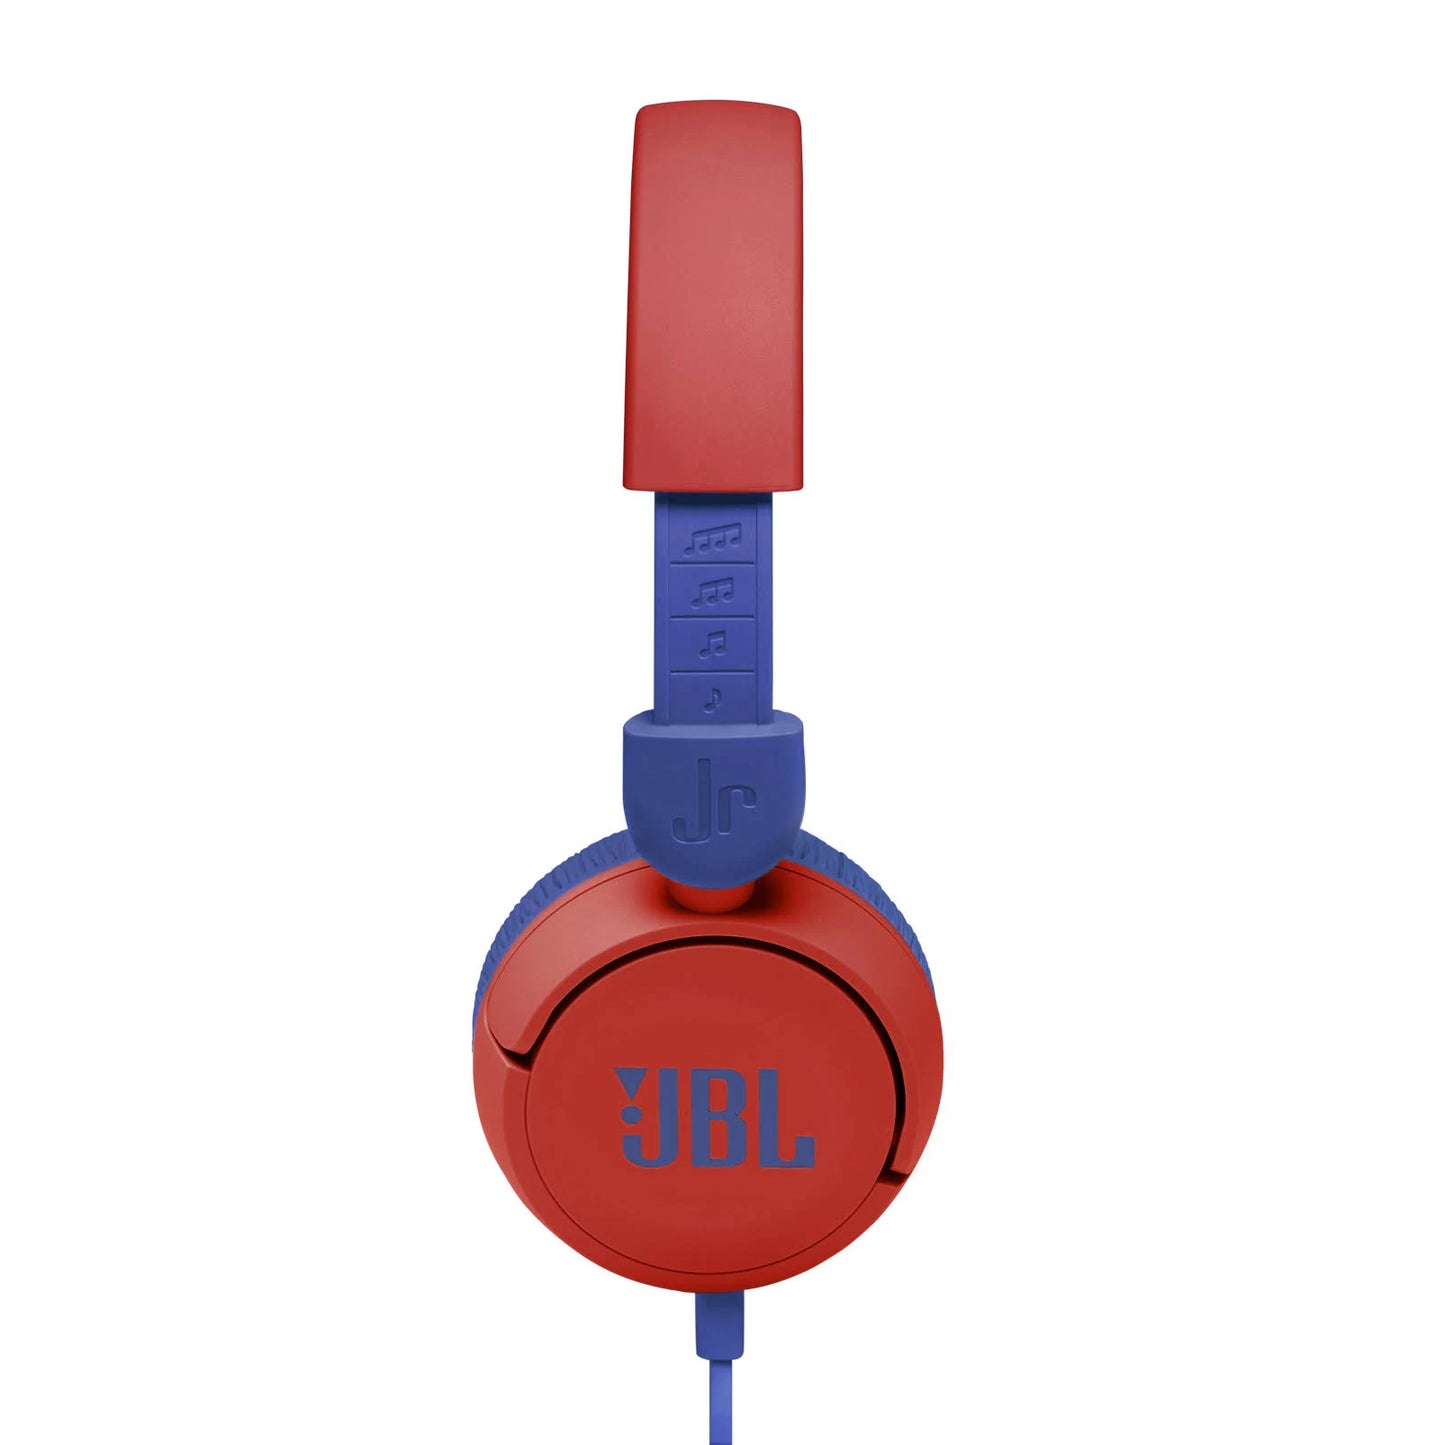 BL Jr 310 - Children's over-ear headphones with aux cable and built-in microphone